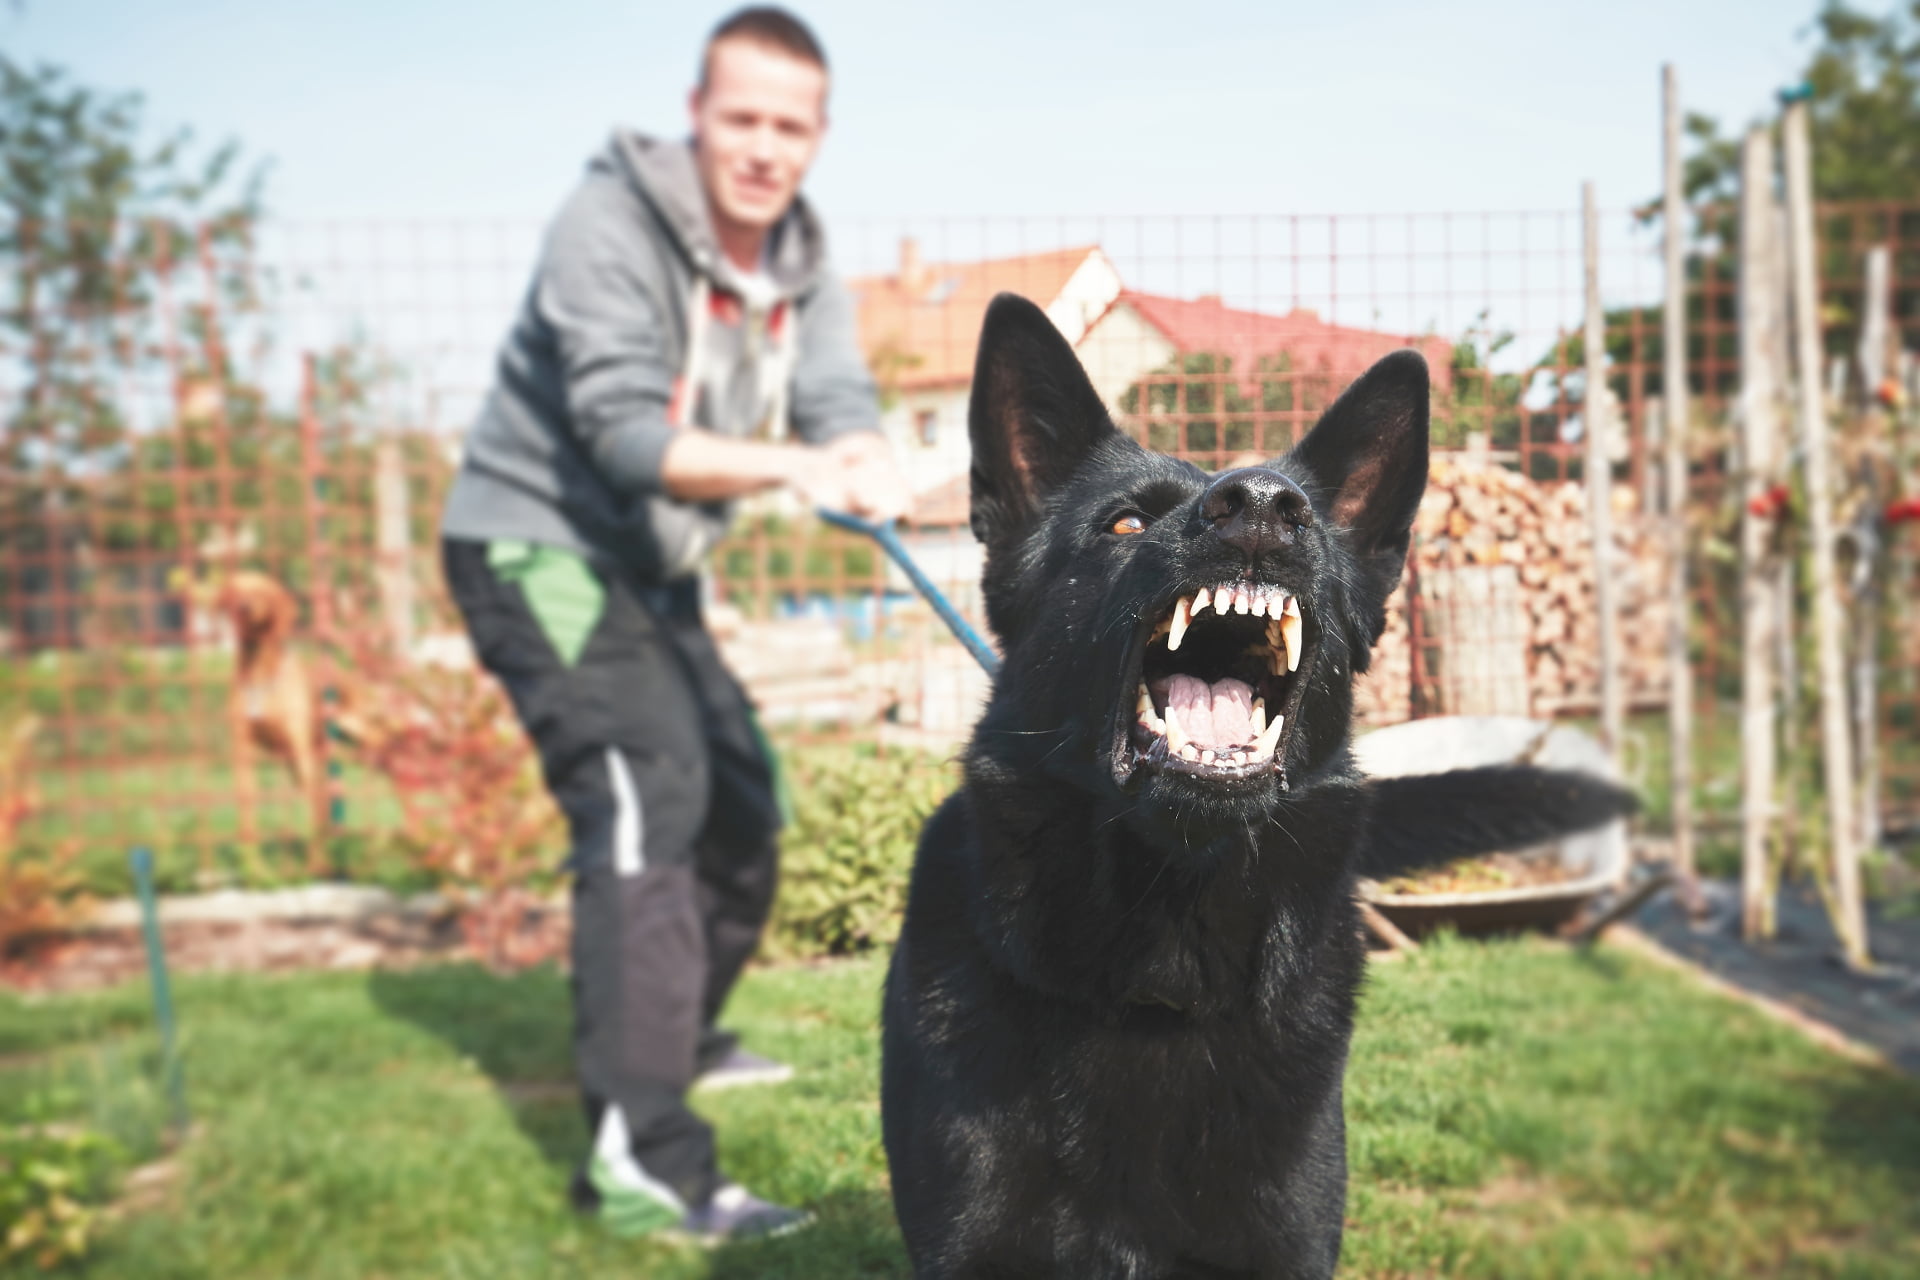 can you train aggression out of a dog